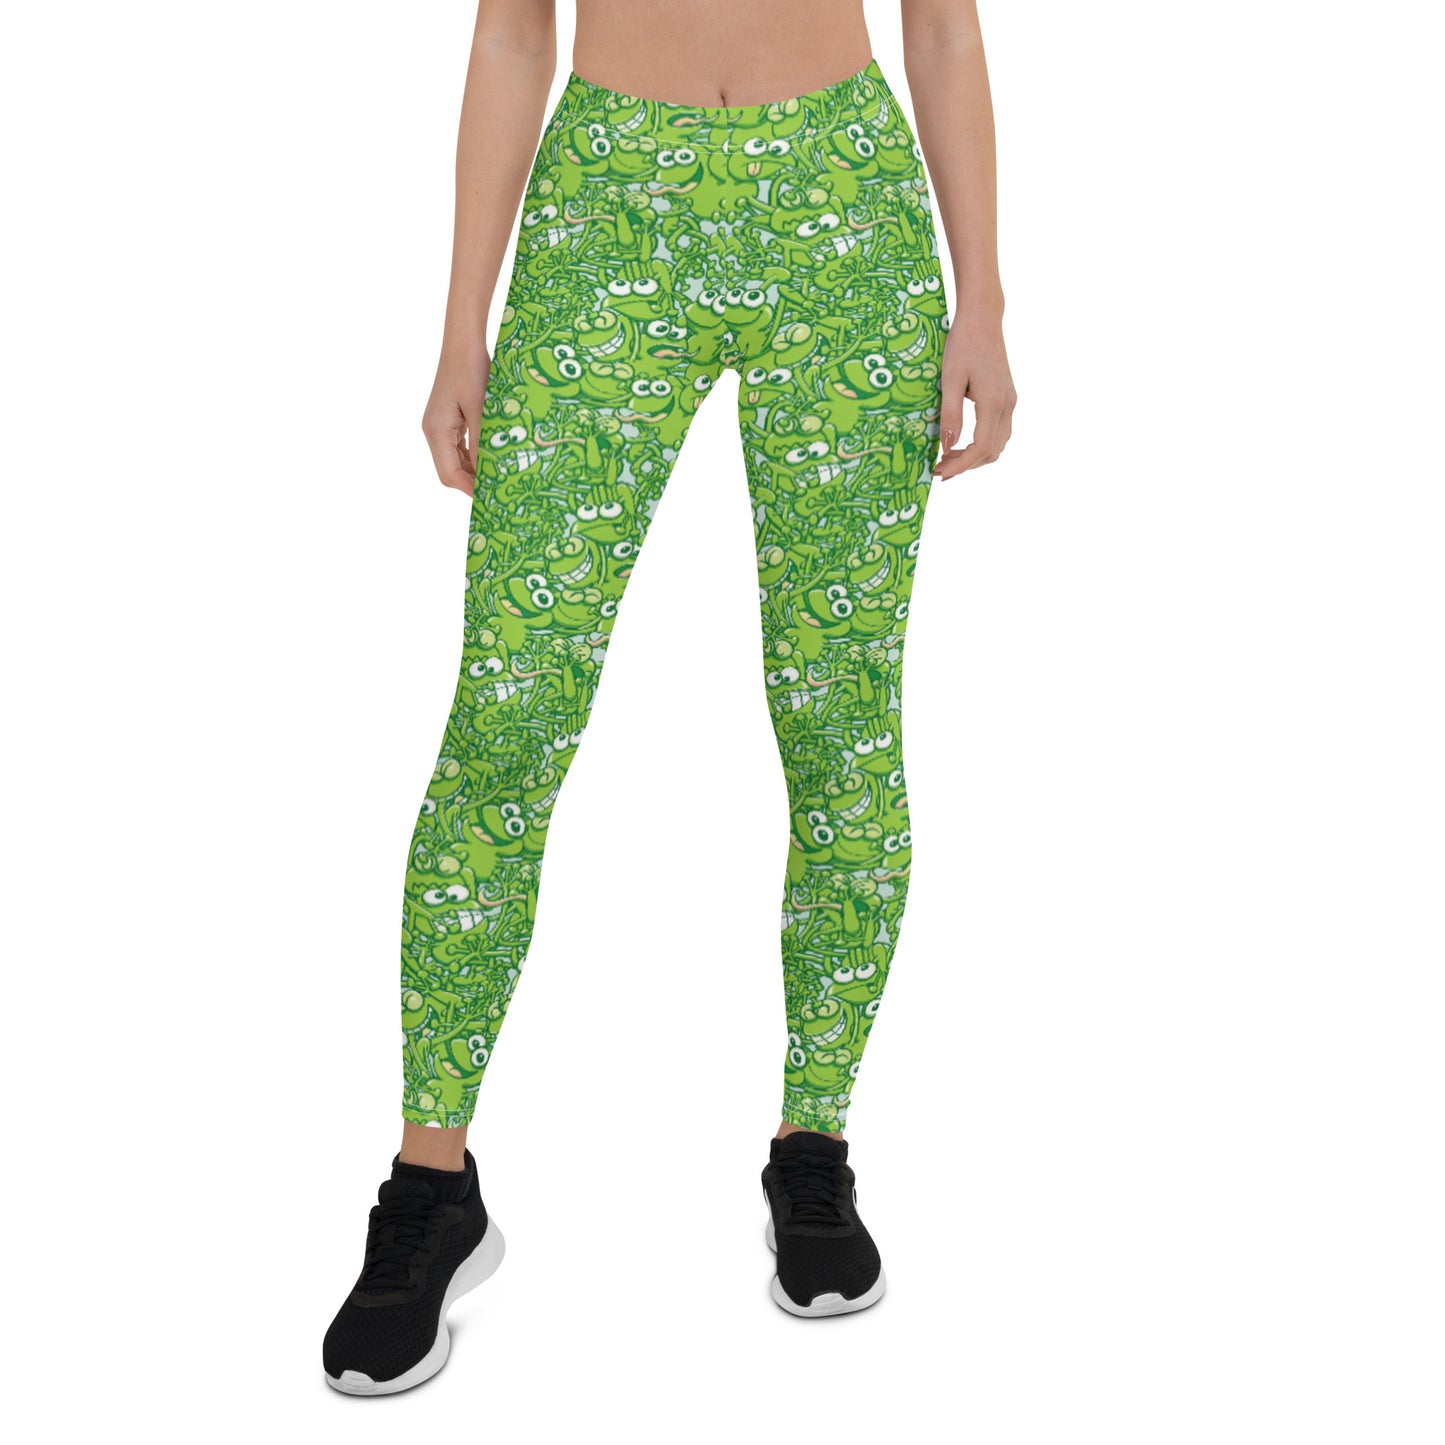 A tangled army of happy green frogs appears when the rain stops Leggings. Front view